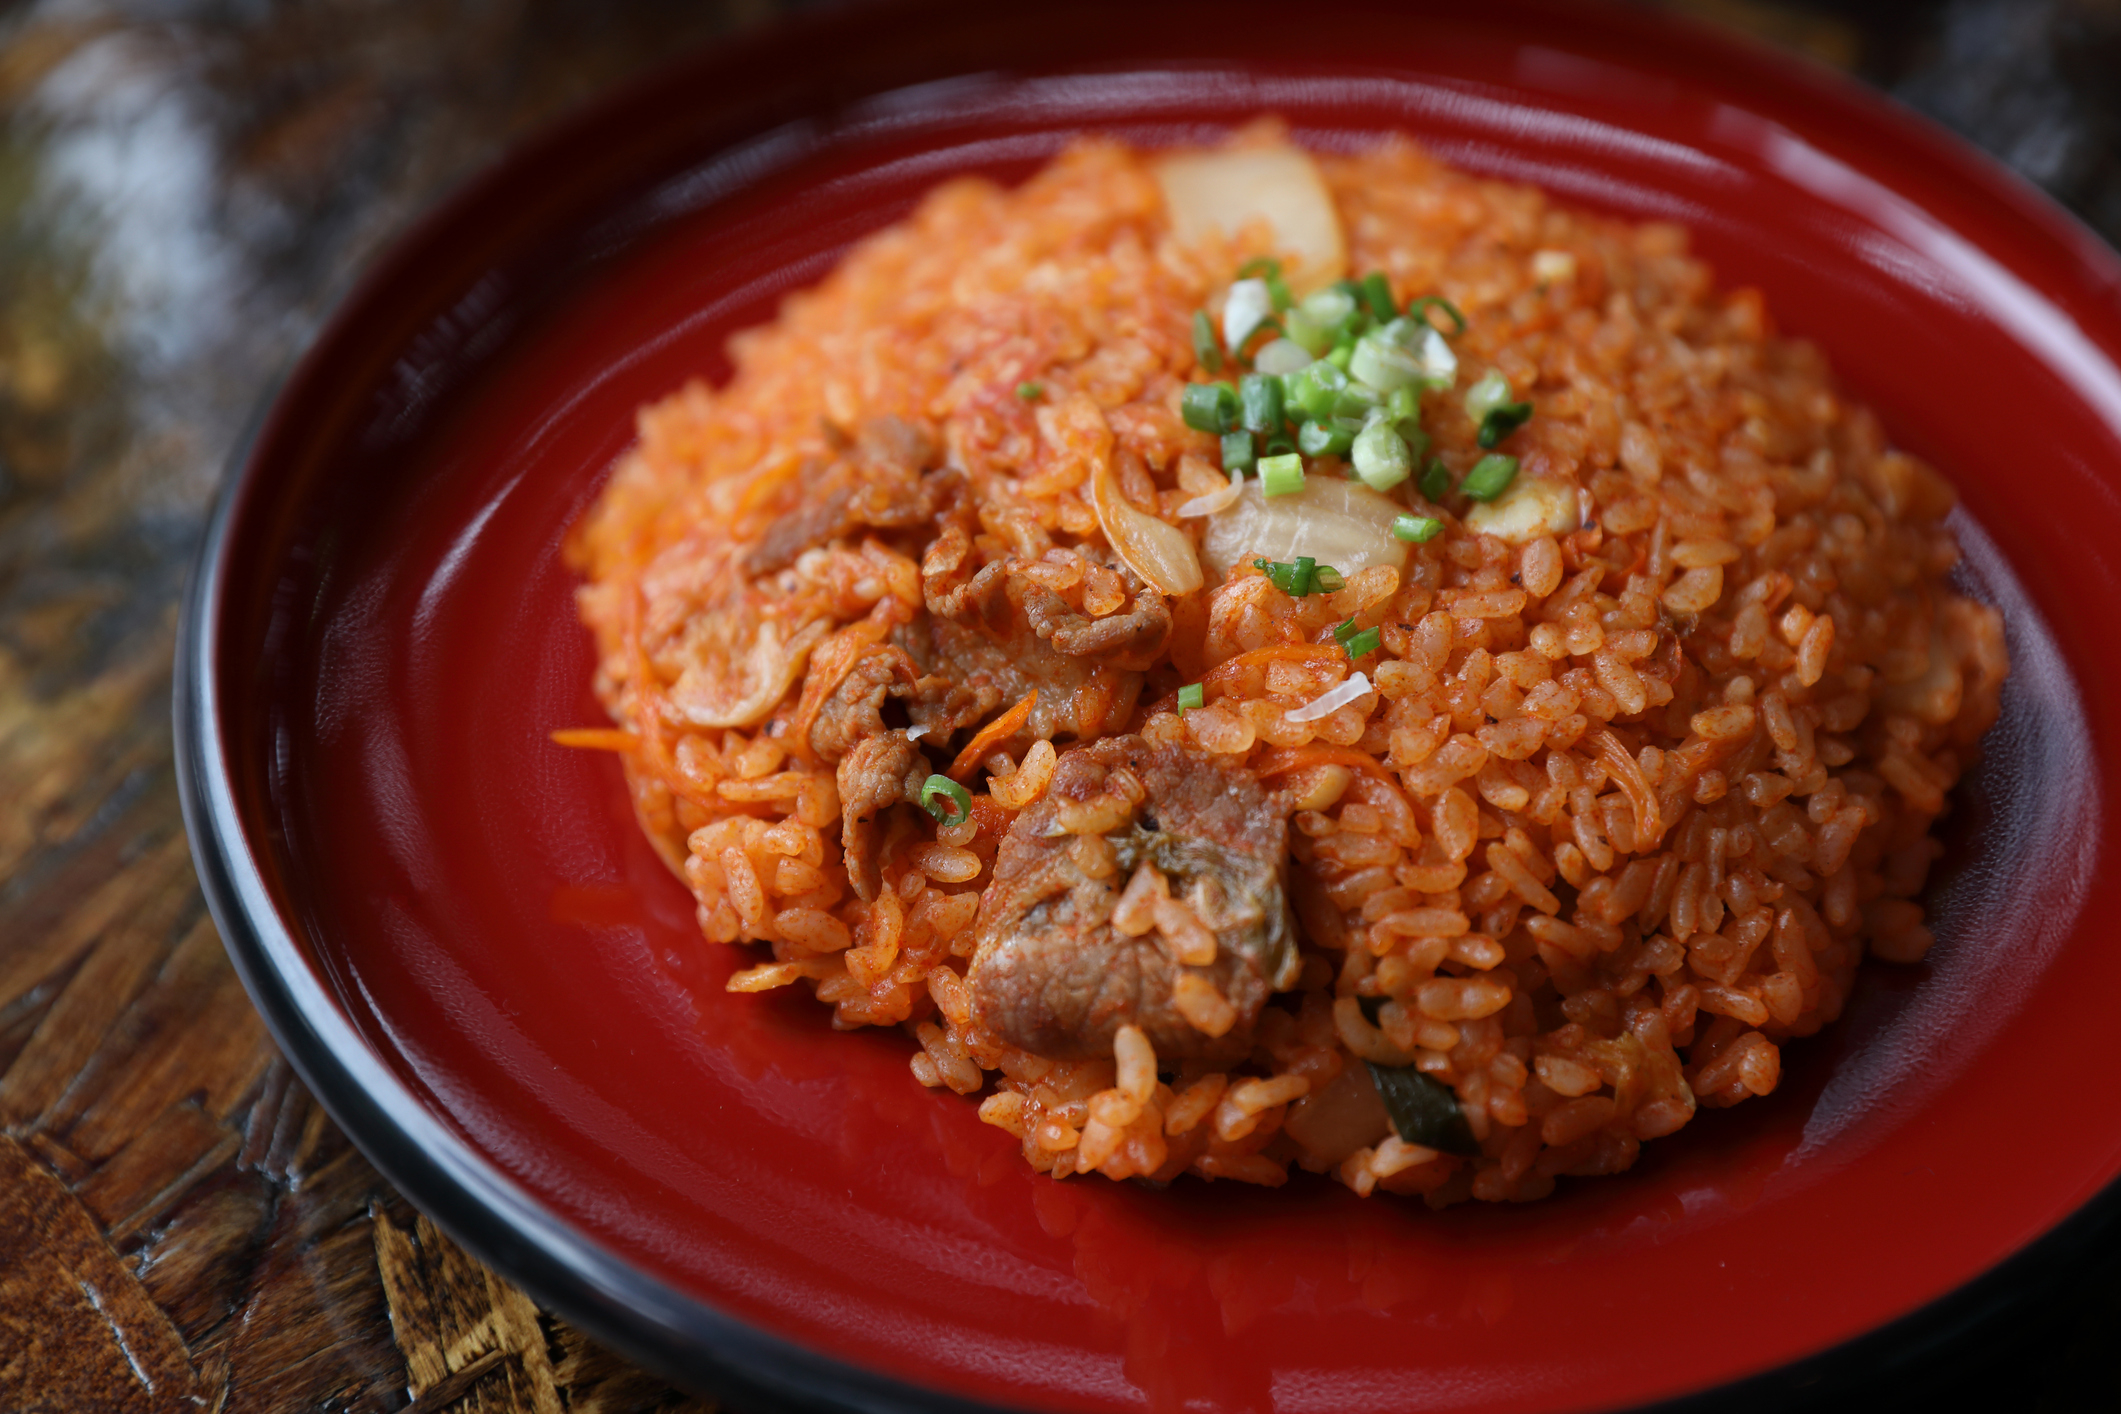 A plate of jollof rice with vegetables and meat, garnished with green onions